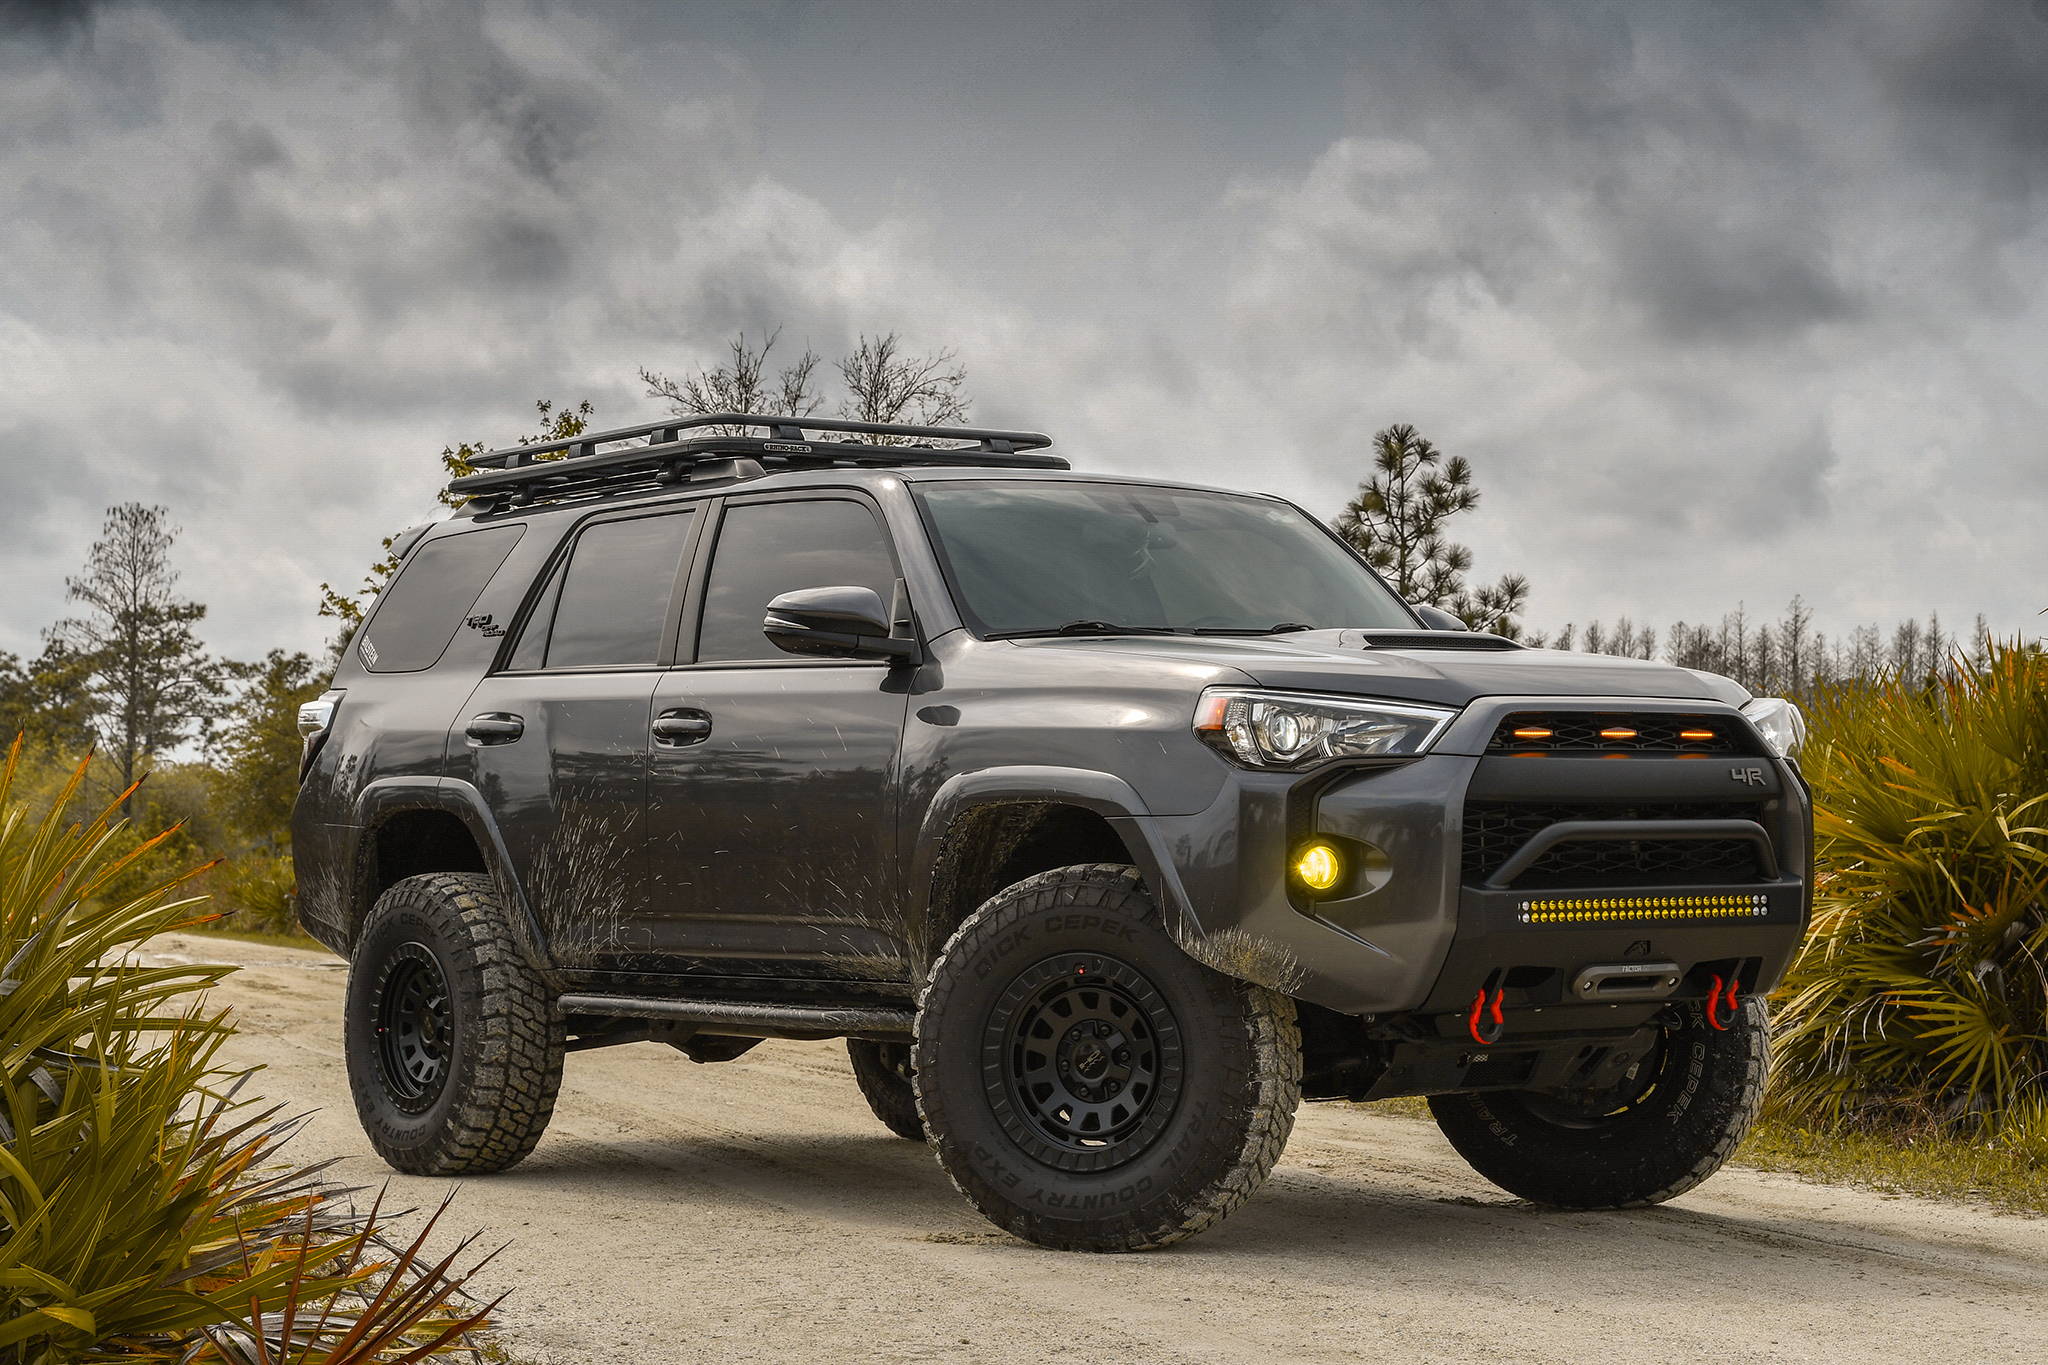 2019 Magnetic Grey Toyota 4-Runner Lifted with the HD Off-Road Overland Sector Venture Wheels in 17x9.0 in All Satin Black